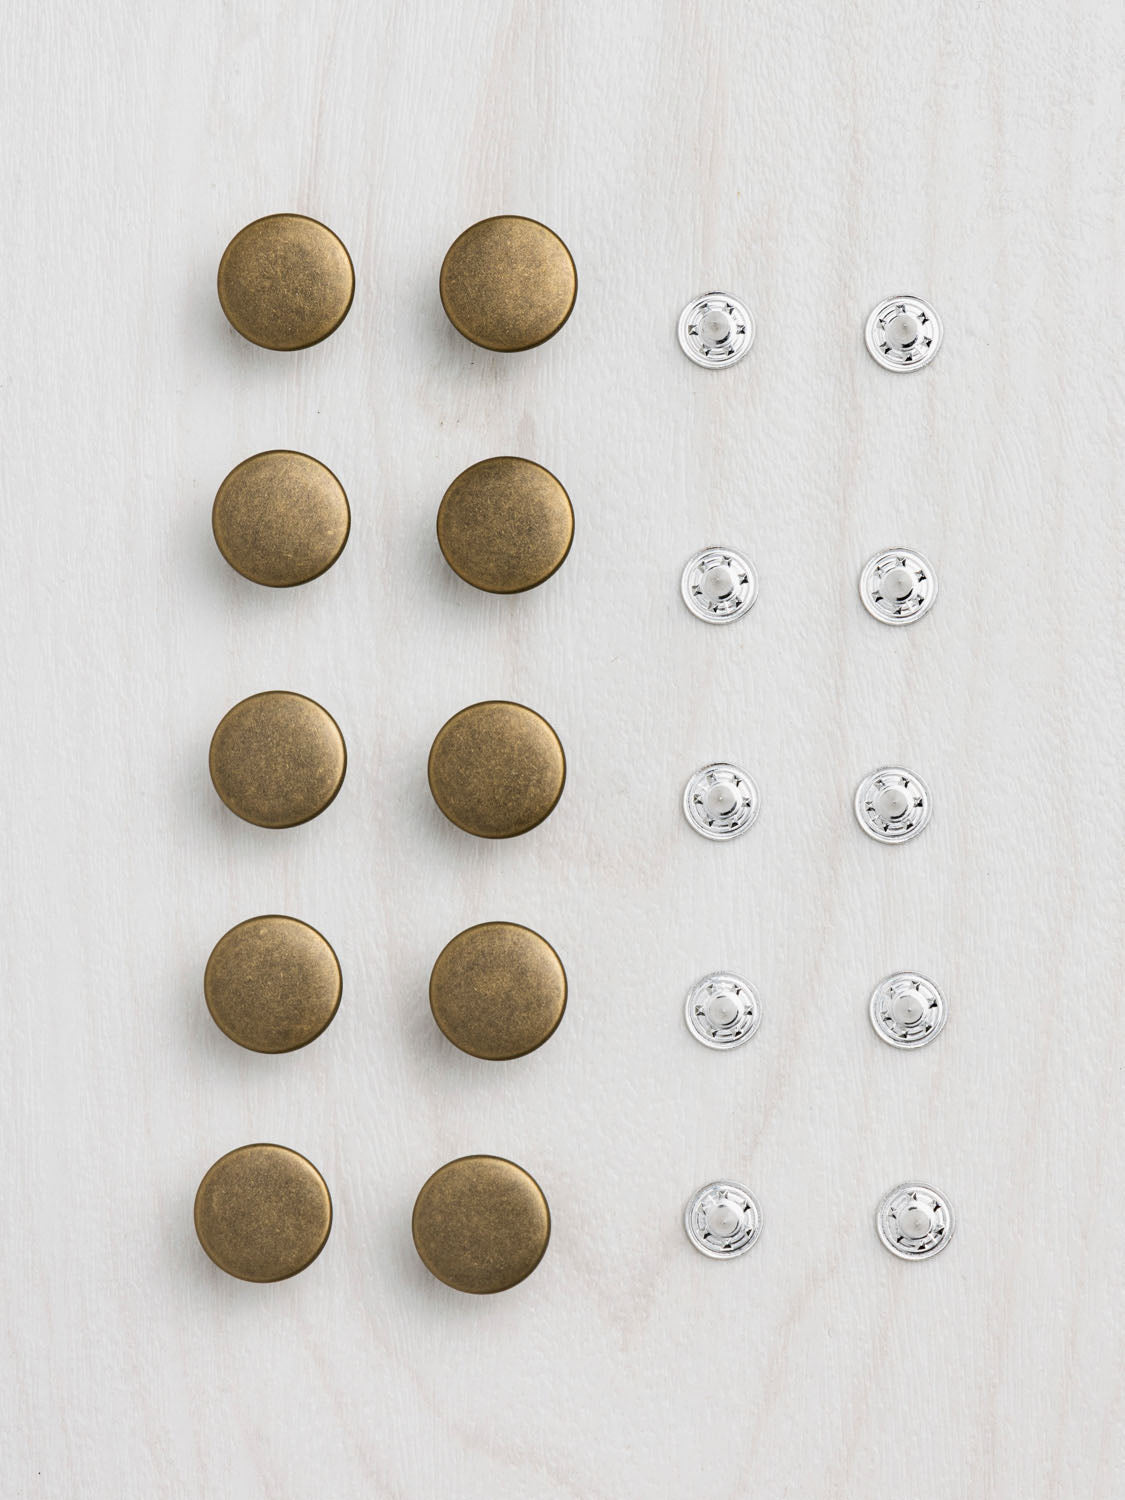 Jeans Buttons (17mm) - Set of 2  Jeans button, Solid metal, Stud